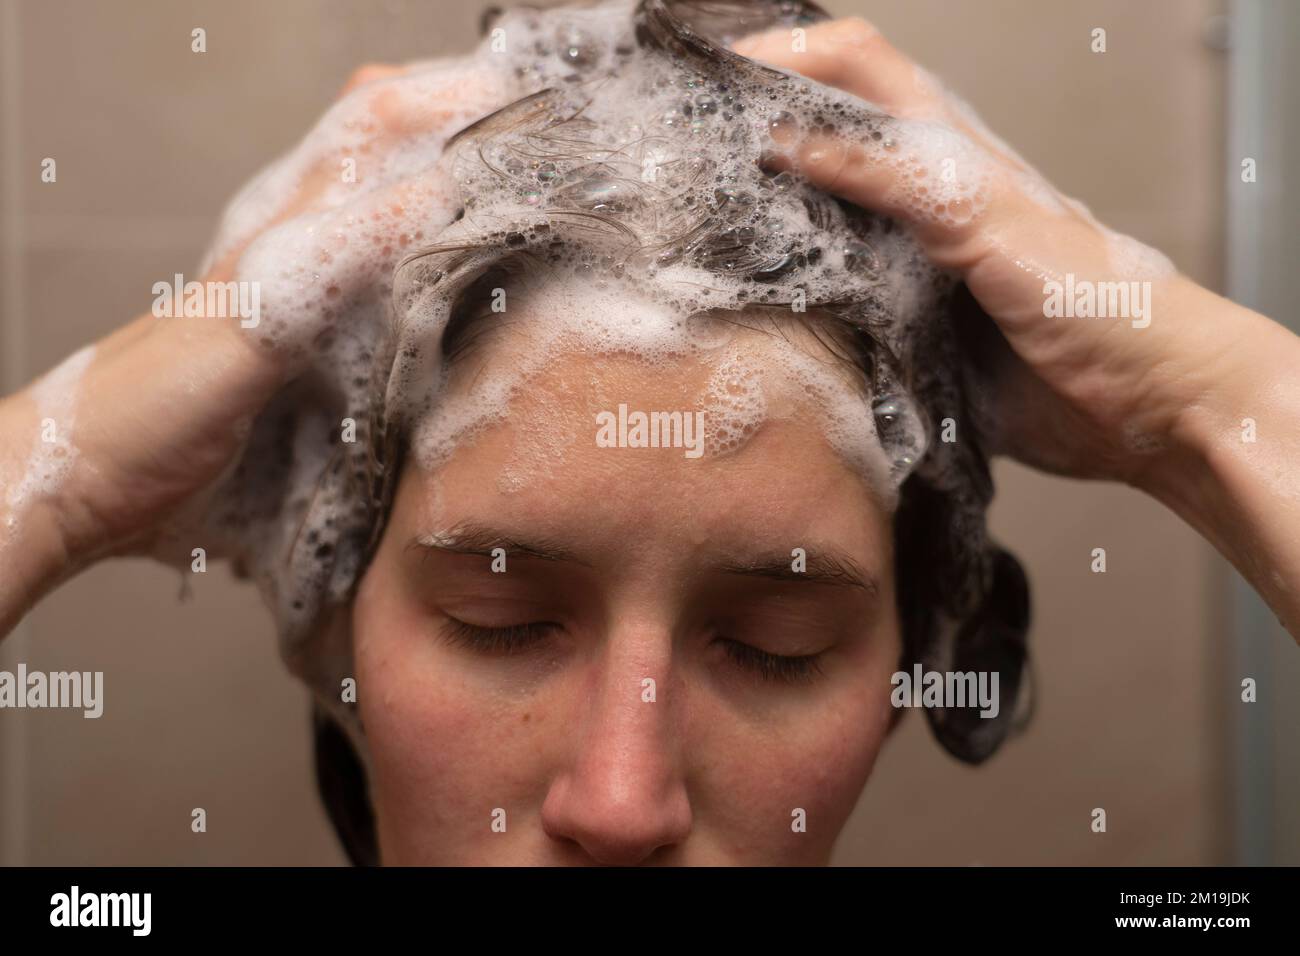 A woman in her thirties washing her hair in the shower with her eyes shut and rubbing shampoo suds into her hair Stock Photo